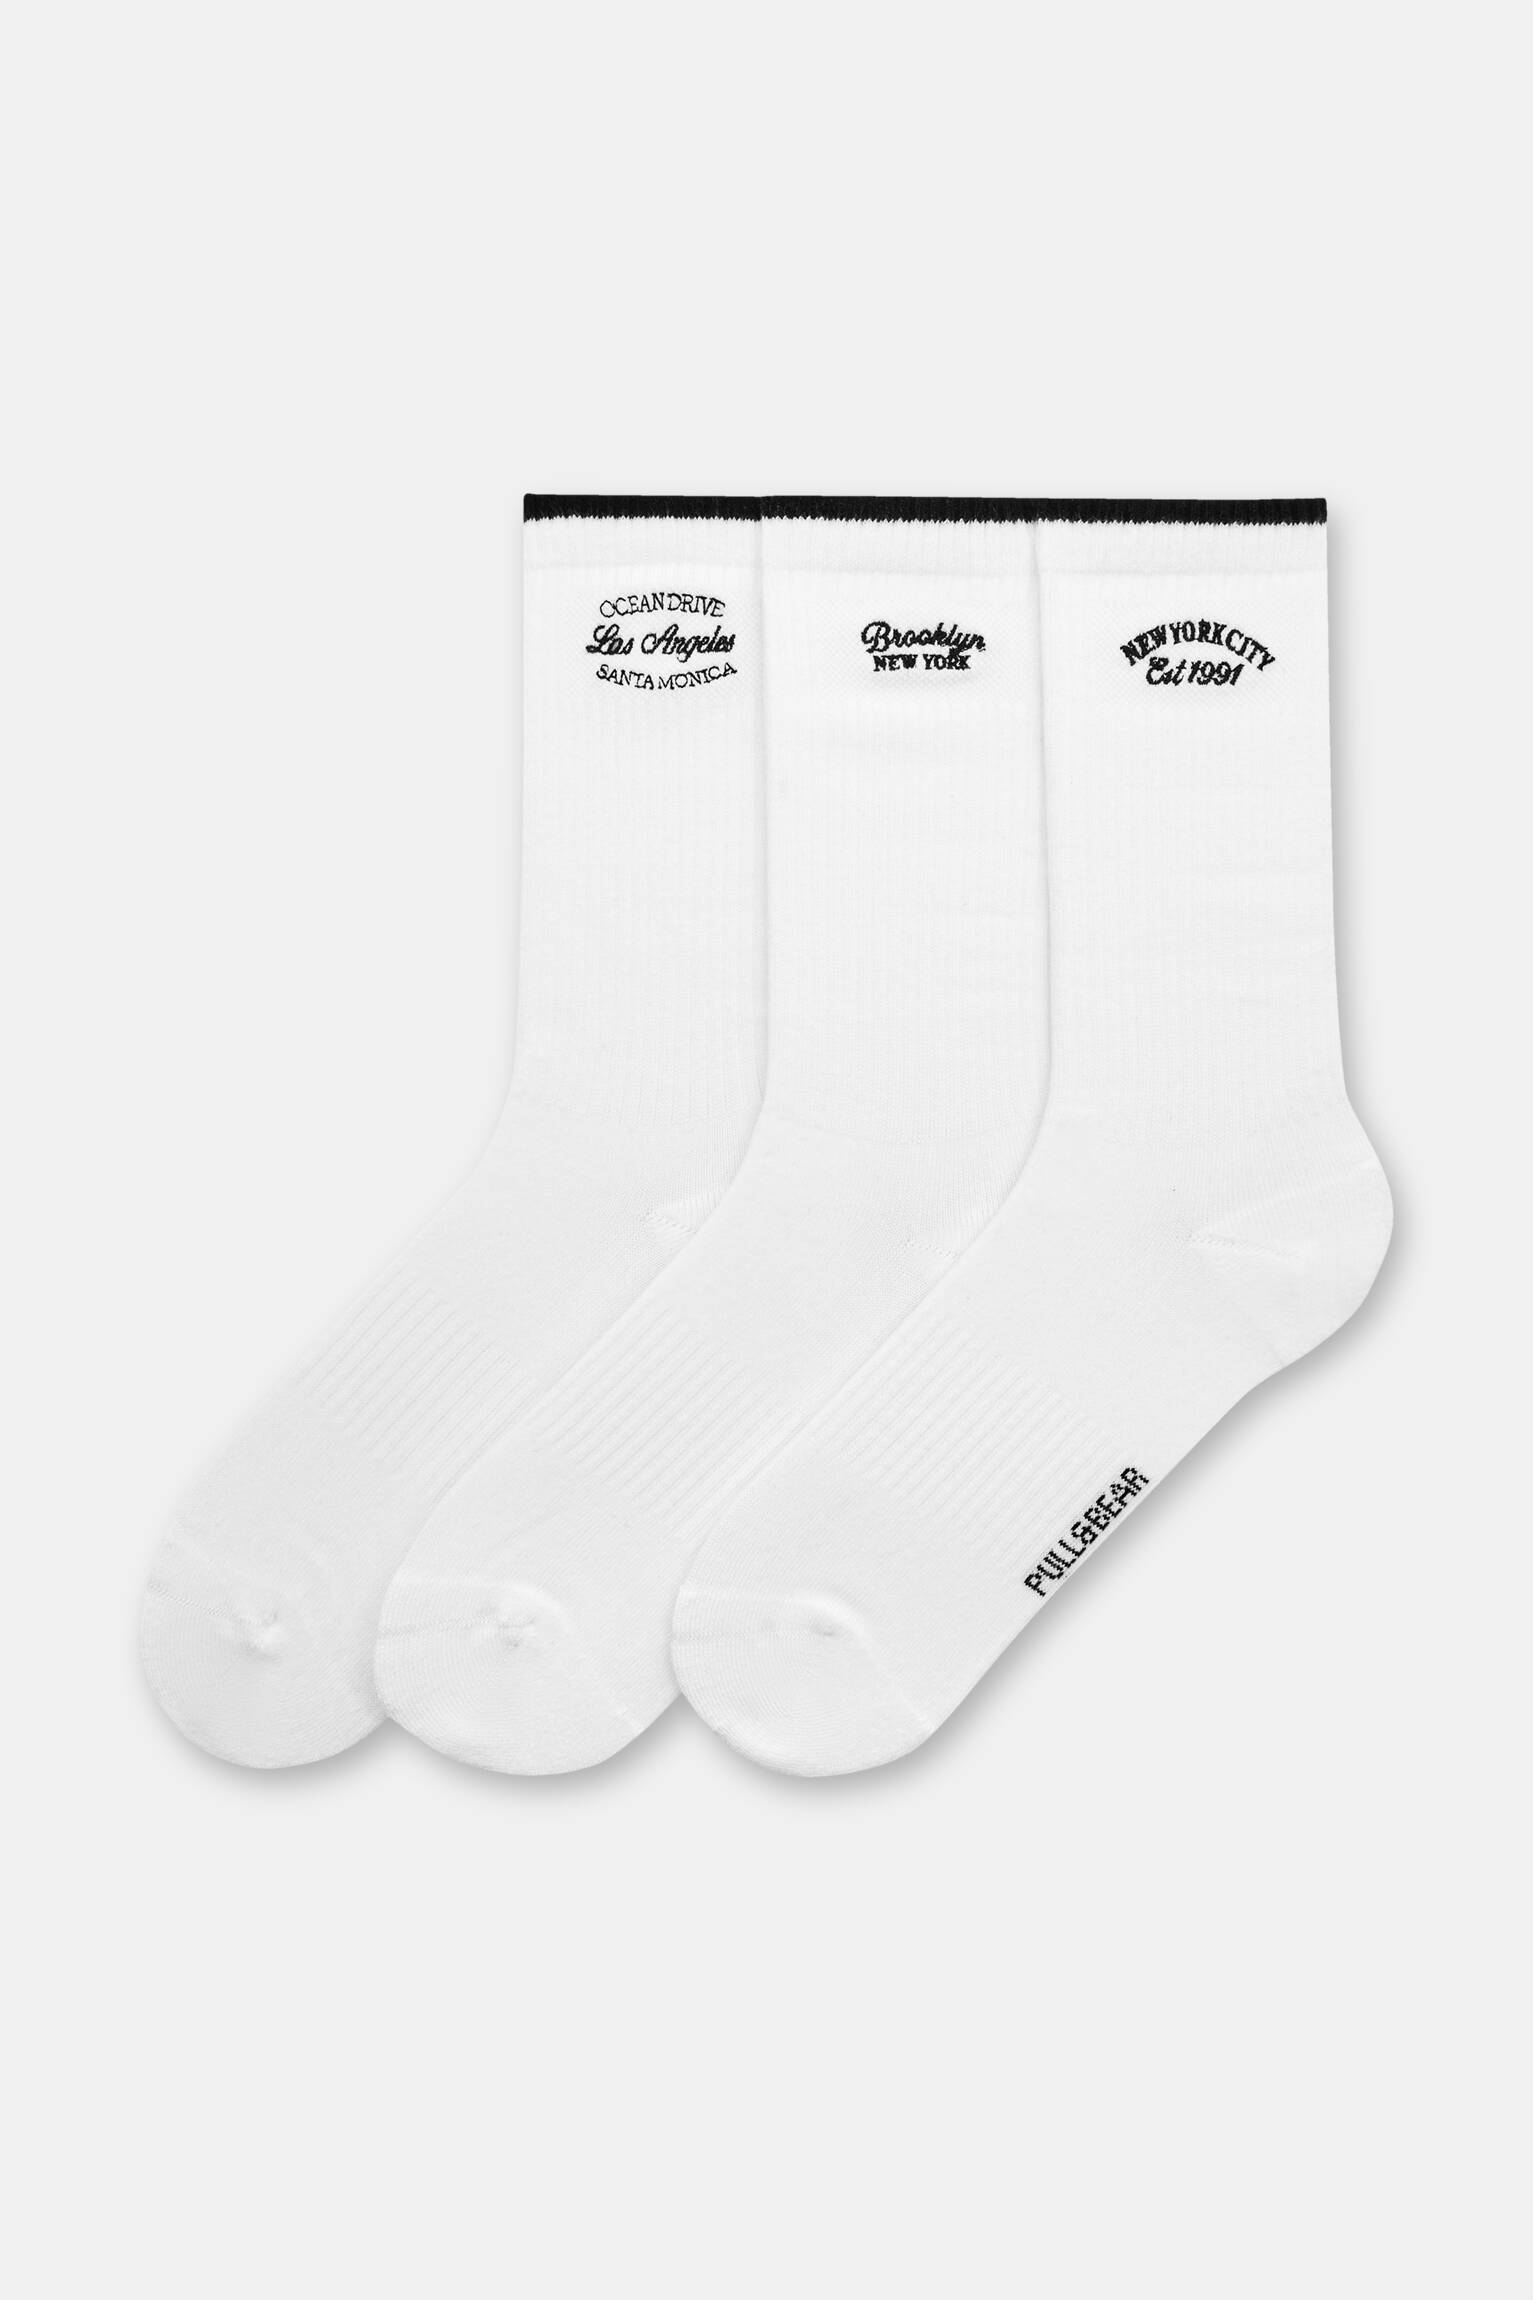 chaussettes blanches broderie villes